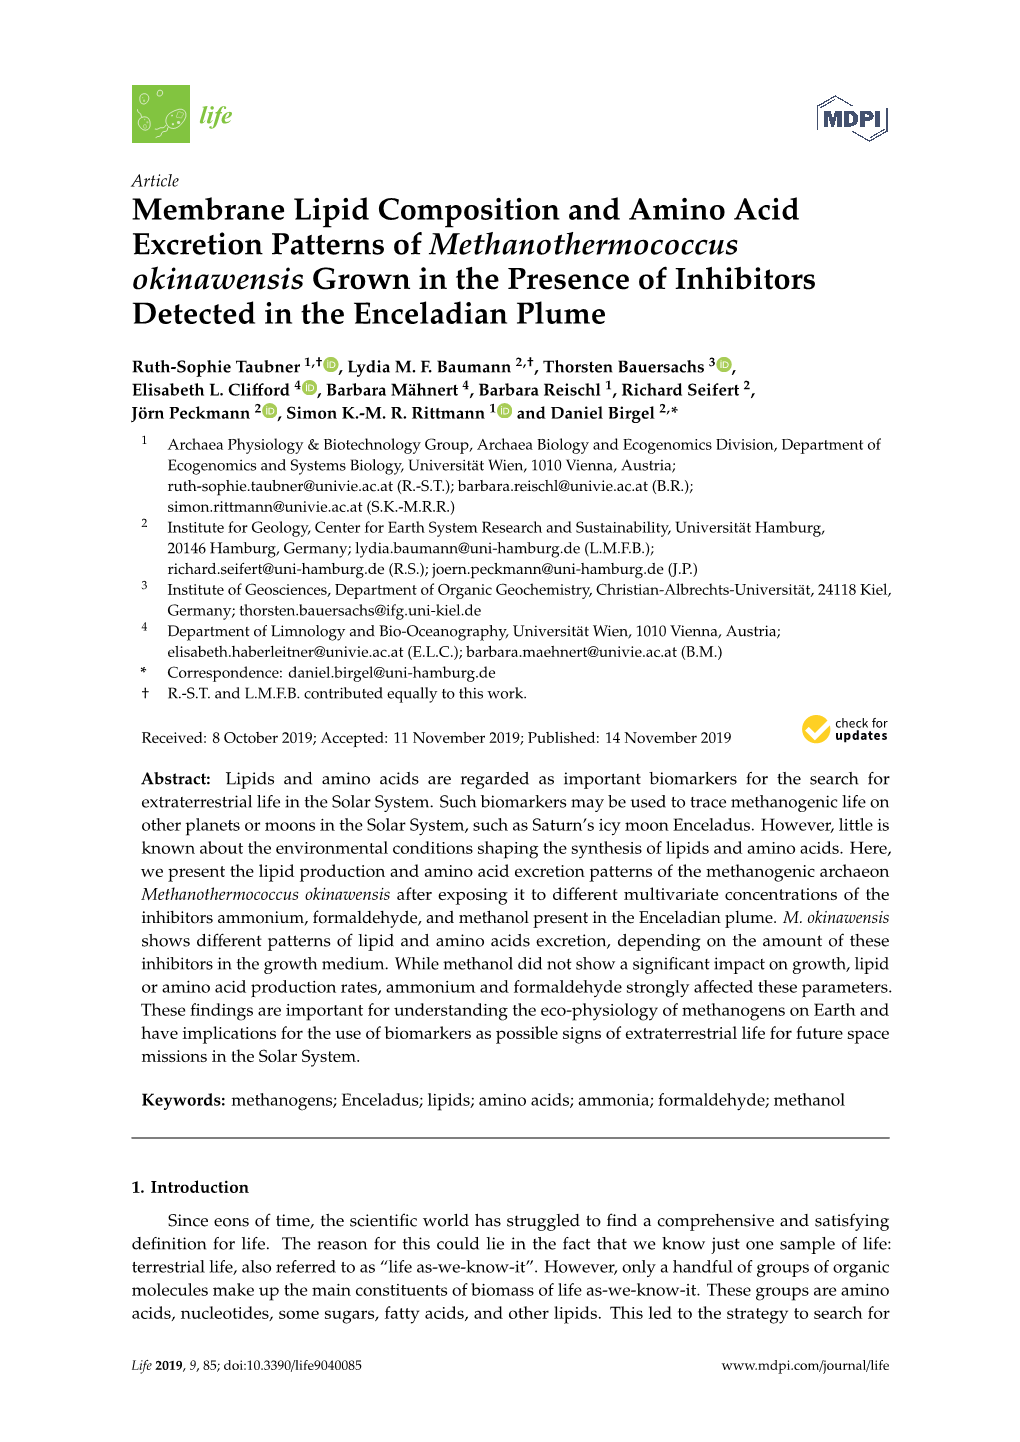 Membrane Lipid Composition and Amino Acid Excretion Patterns of Methanothermococcus Okinawensis Grown in the Presence of Inhibitors Detected in the Enceladian Plume